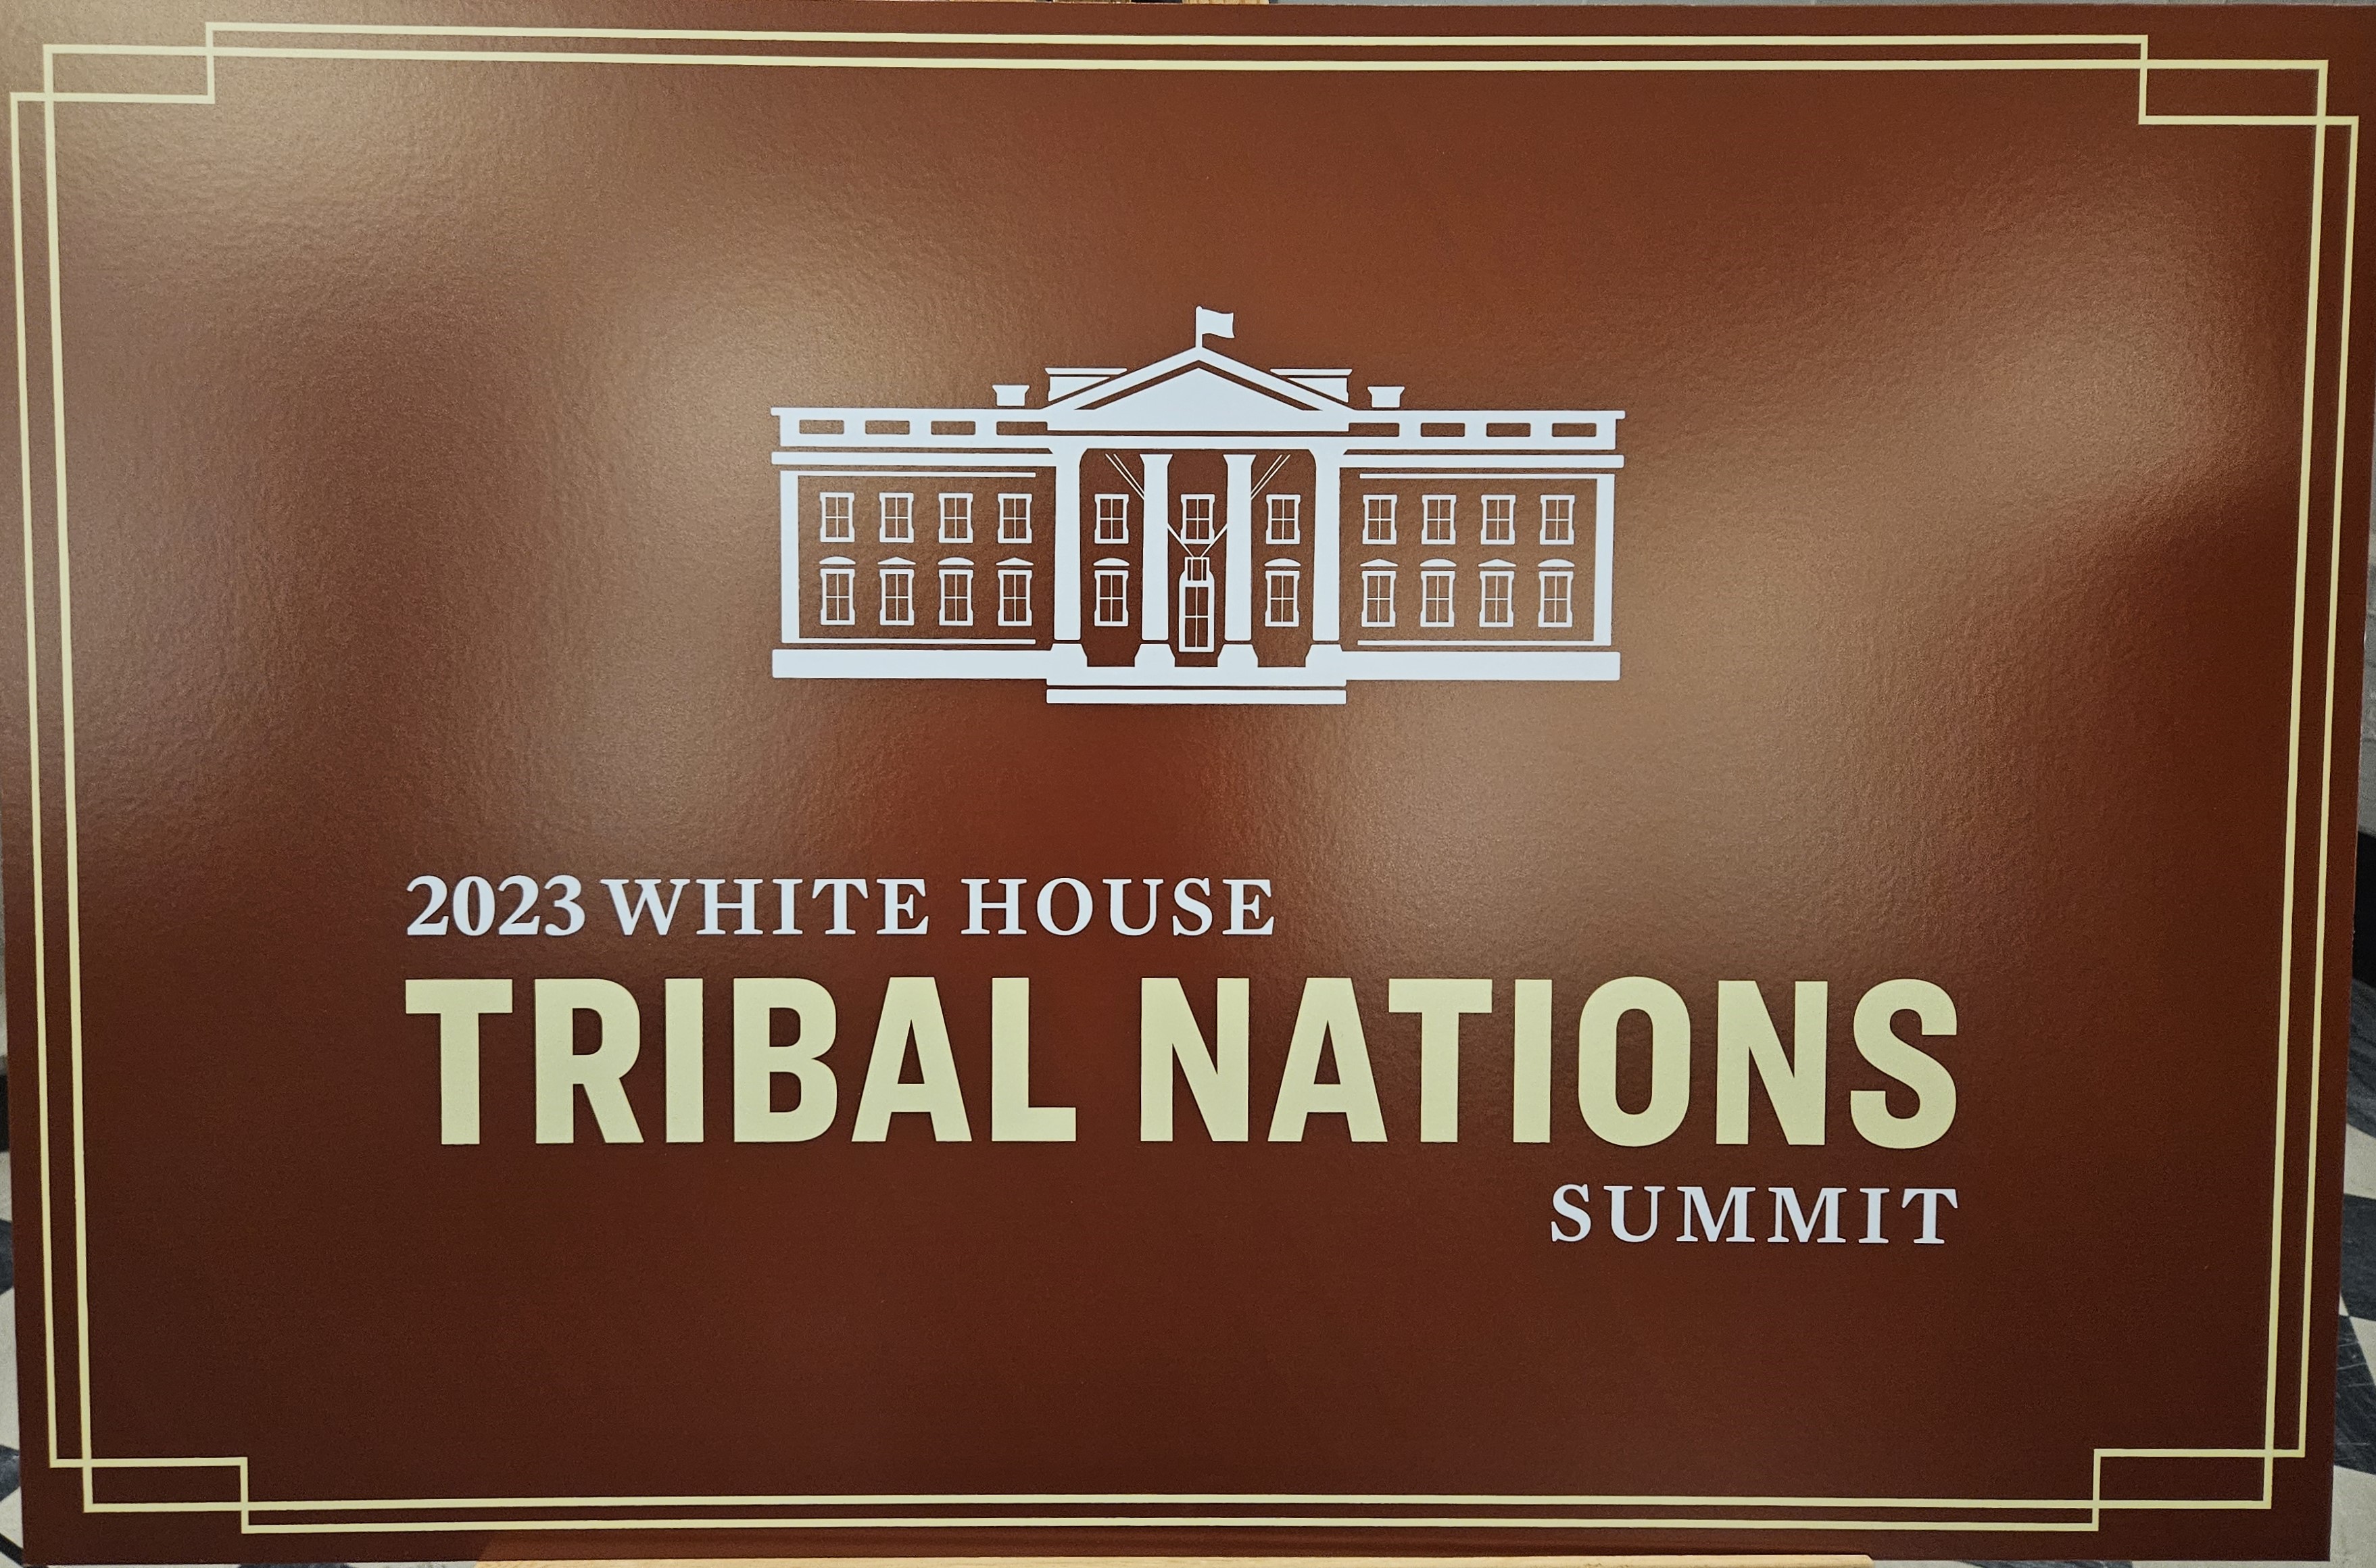 The White House Tribal Nations Summit logo.